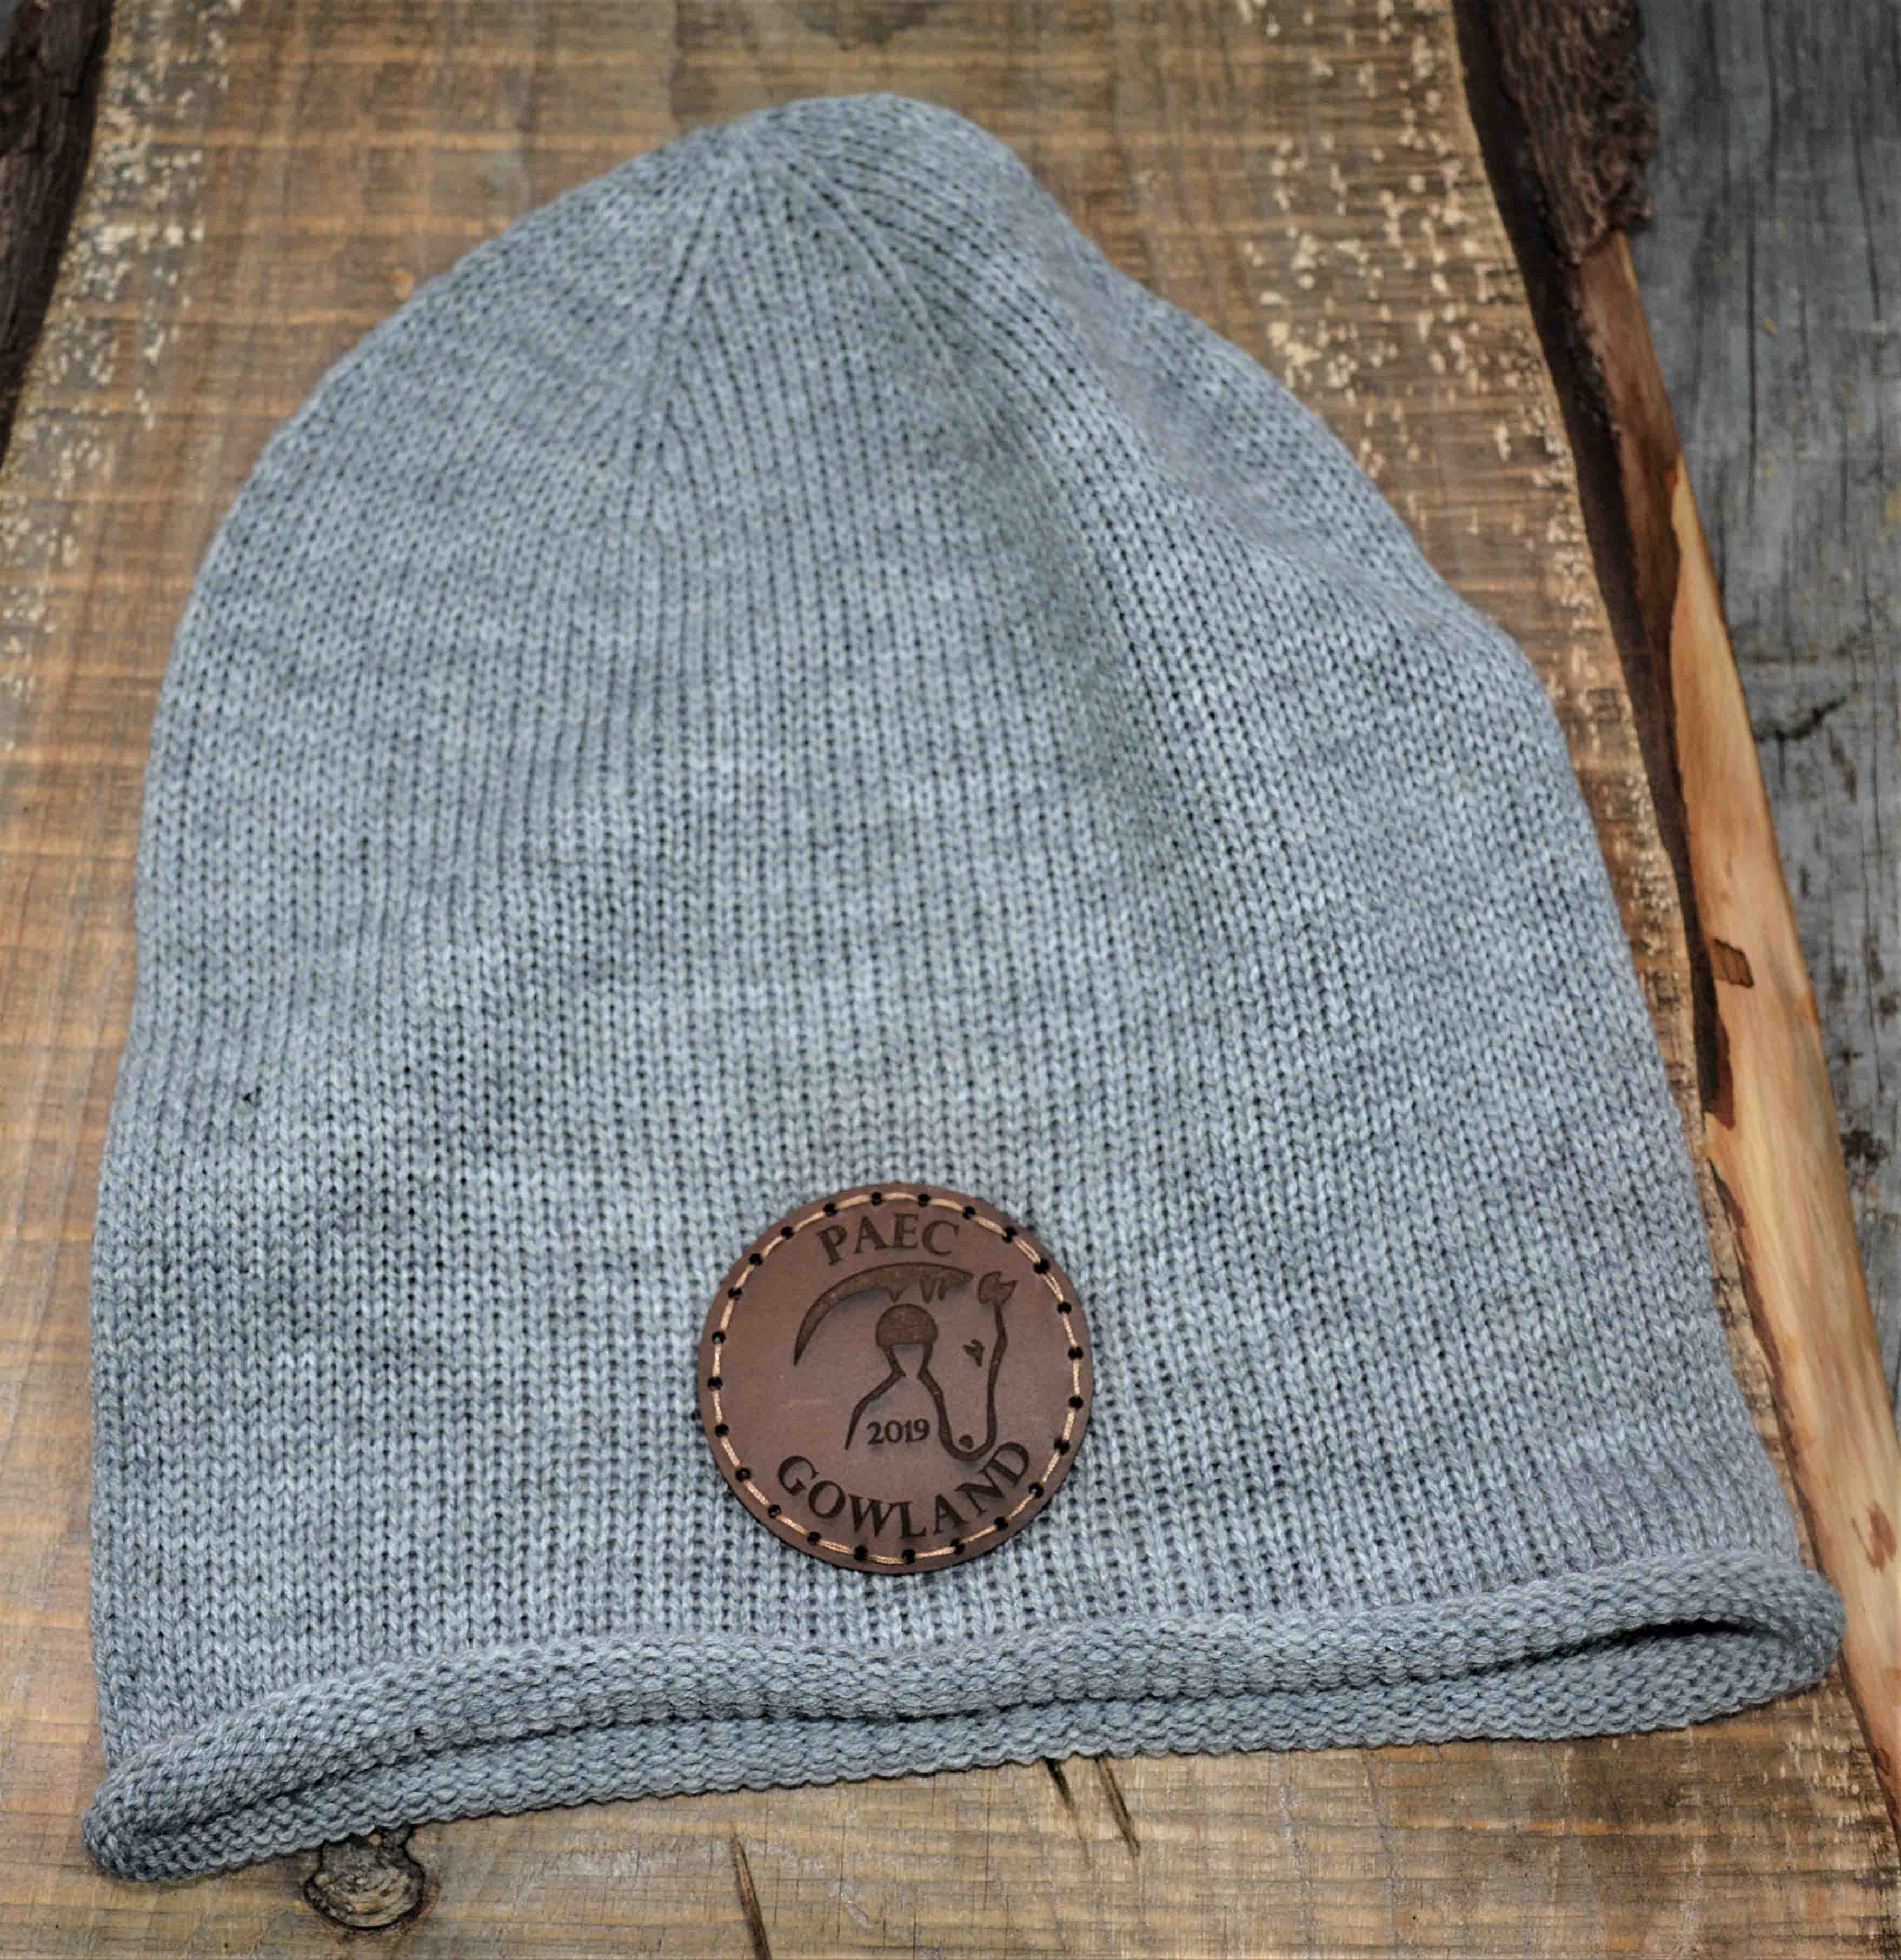 Beanie Hat with Custom Leather Patches.